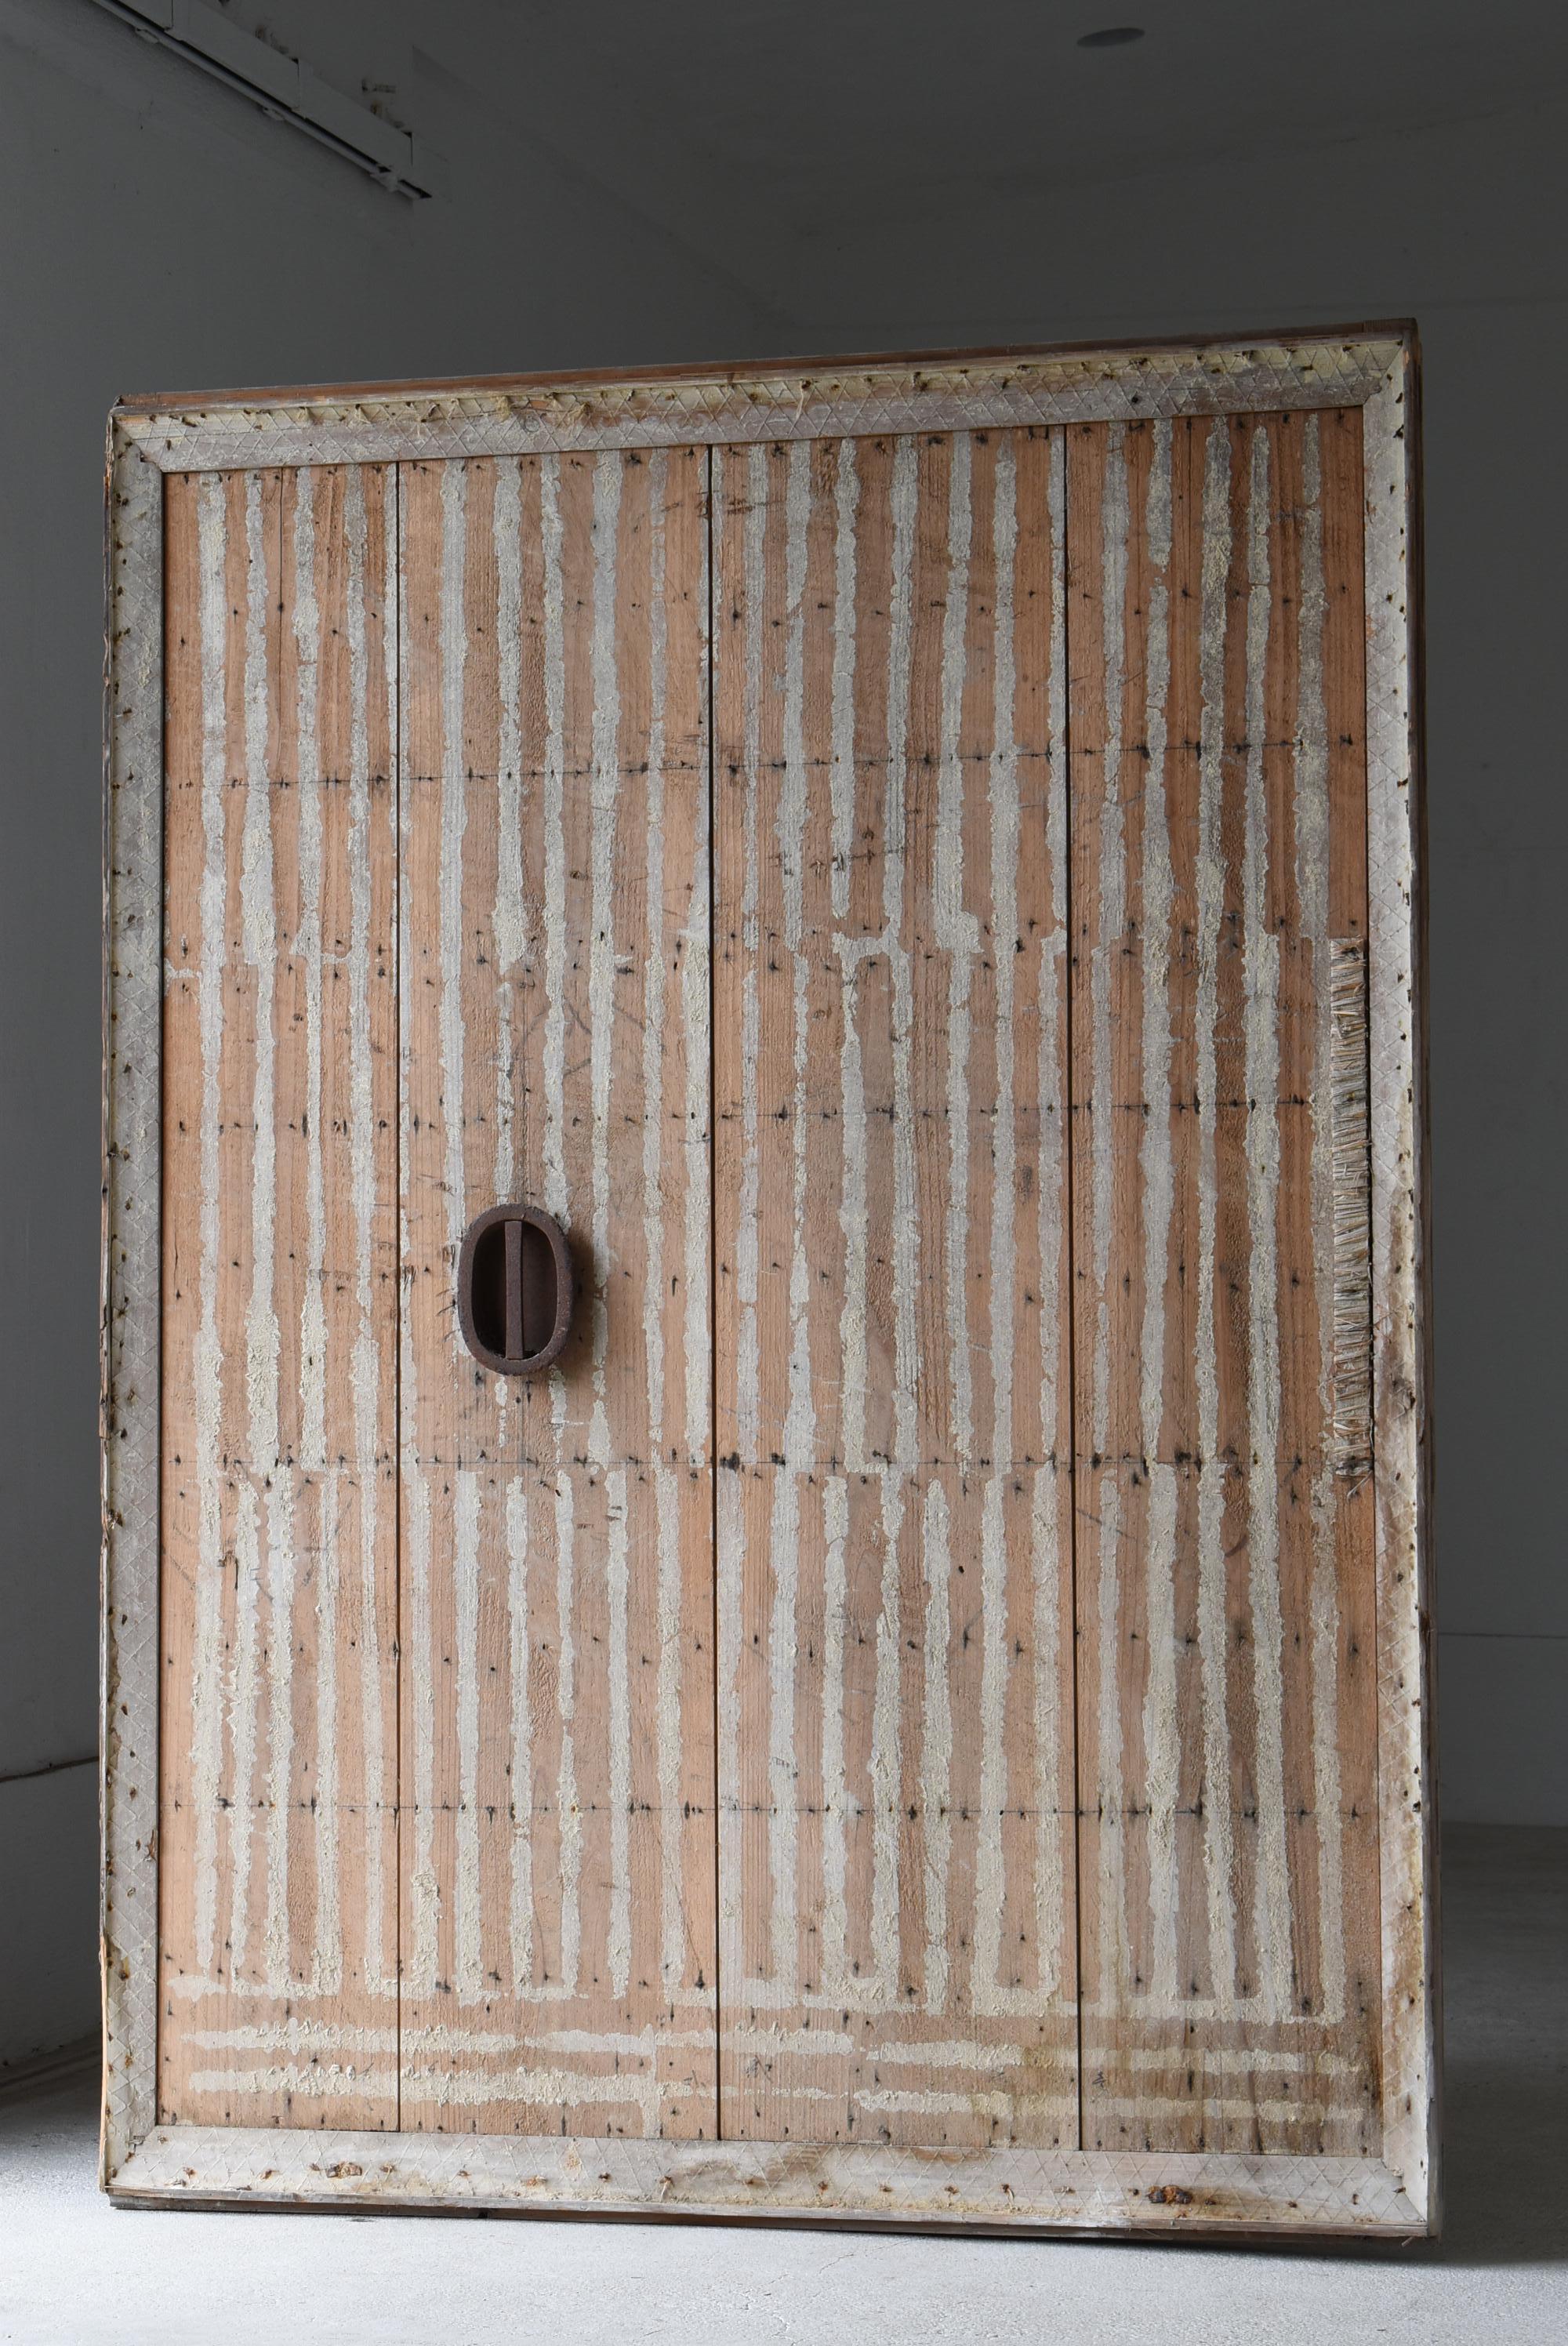 This was a very old Japanese warehouse door.
This door is from the Edo period. (1800s to 1900s).

The door was made of plaster, but the plaster has peeled off and it looks like this.
The Beauty of Coincidence.